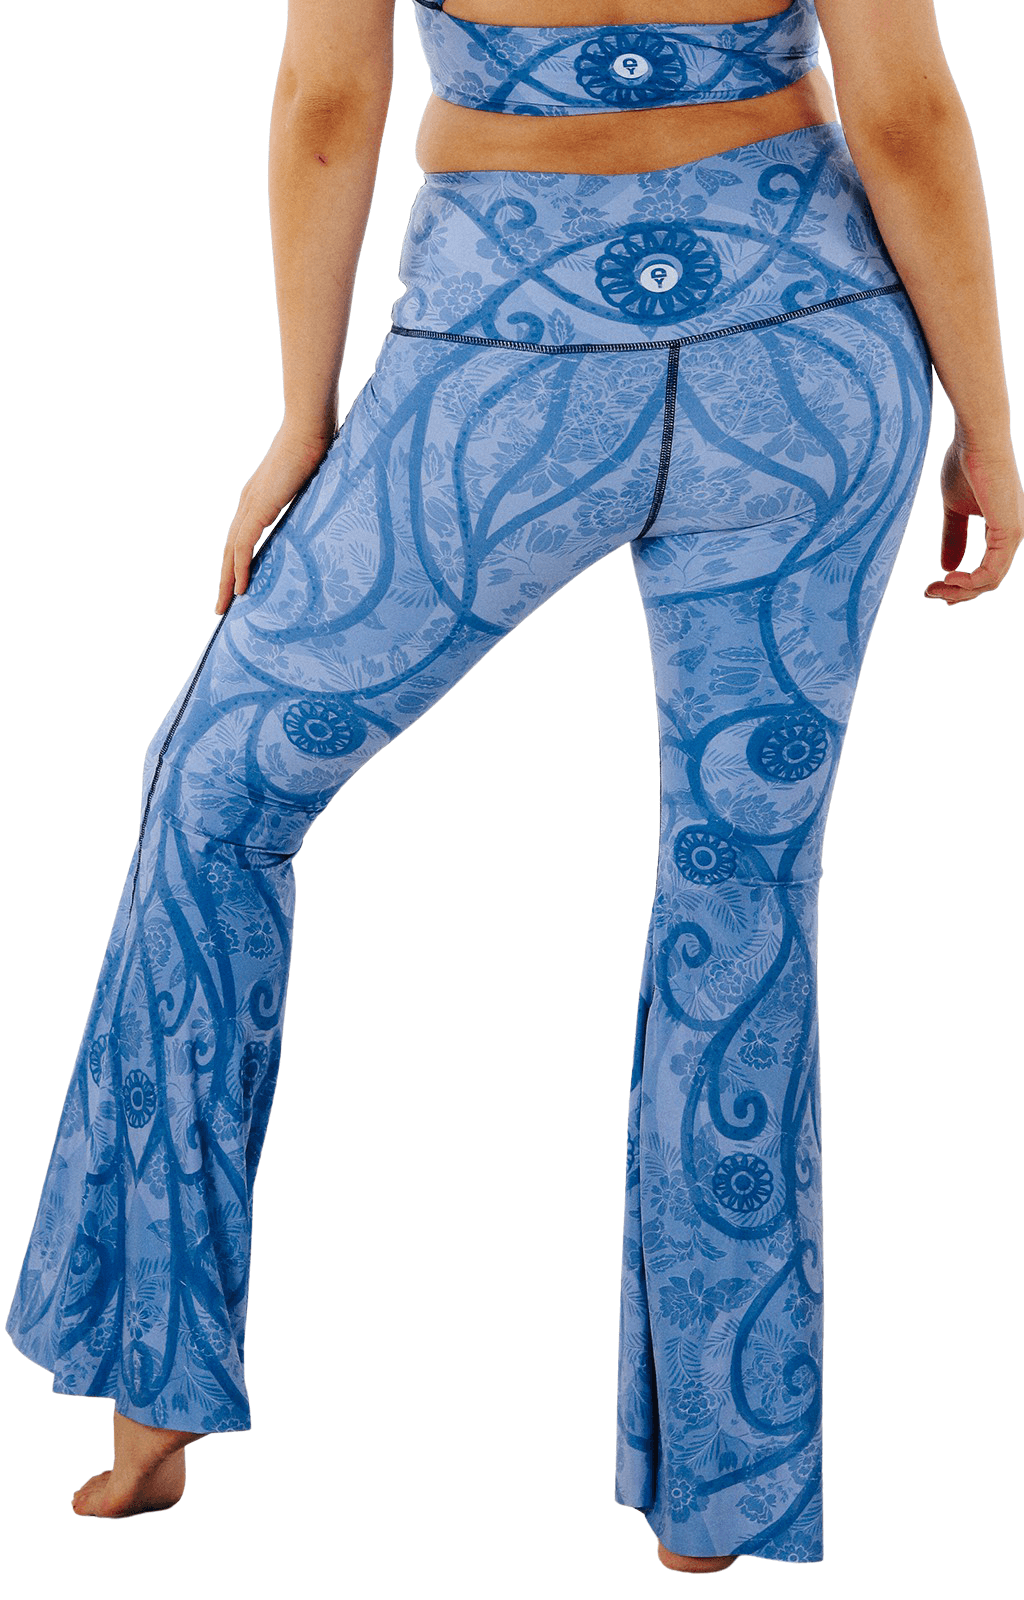 Peaceful Warrior Printed Bell Bottoms Plus